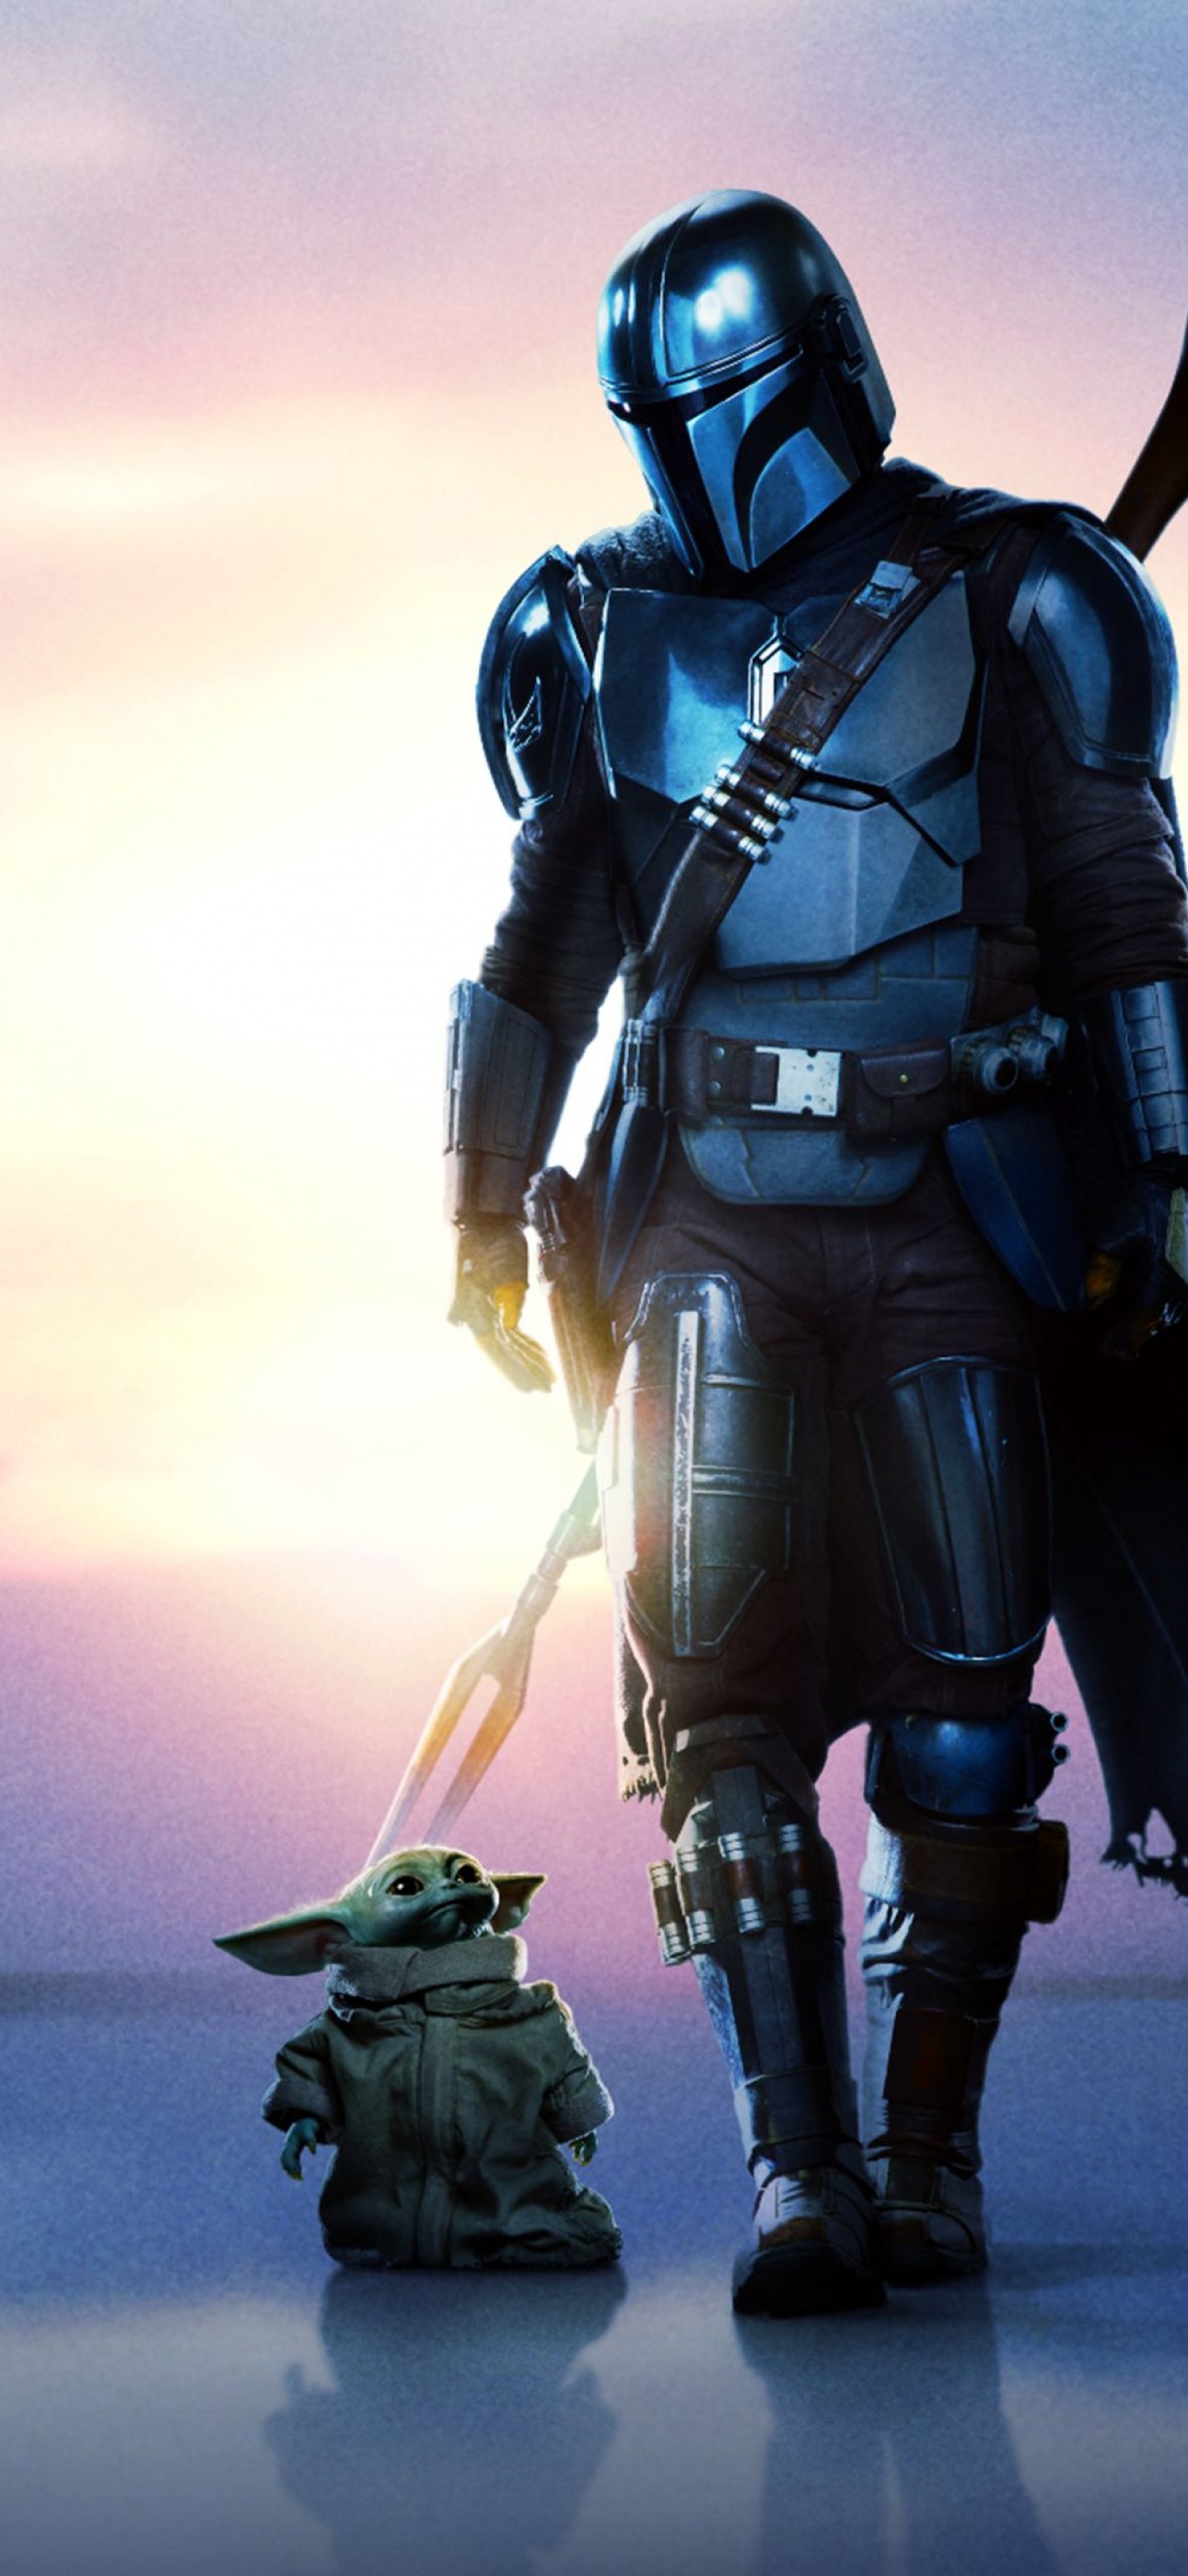 Converted the latest Mandalorian posters into mobile wallpapers   rDisneyPlus